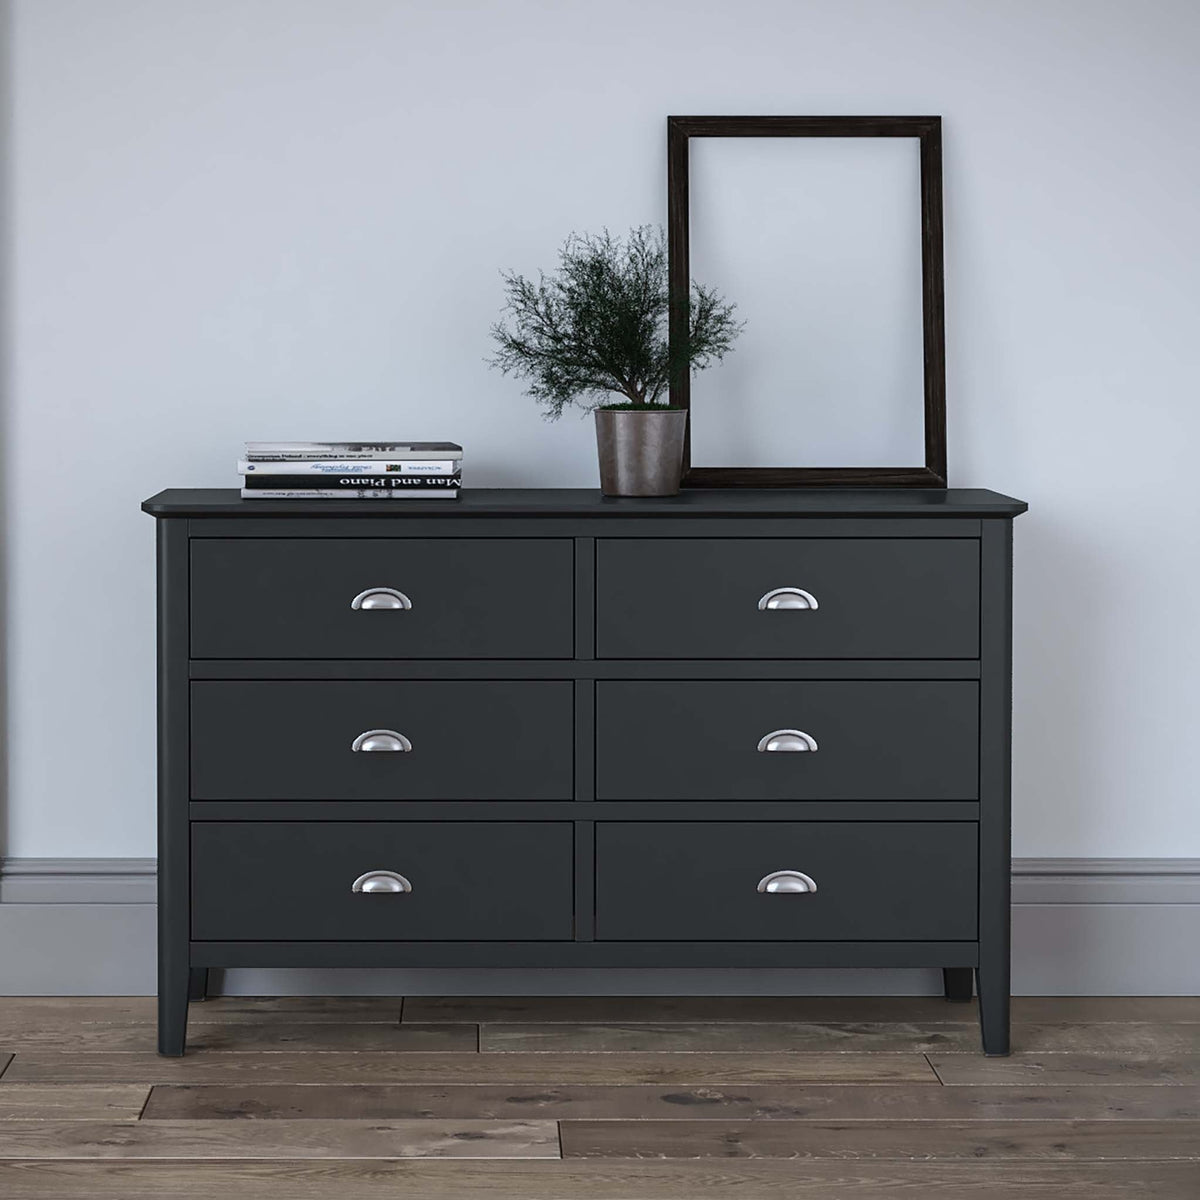 Lifestyle image of the Dumbarton Charcoal Grey Large 3 over 3 Chest of Drawer Storage Cabinet